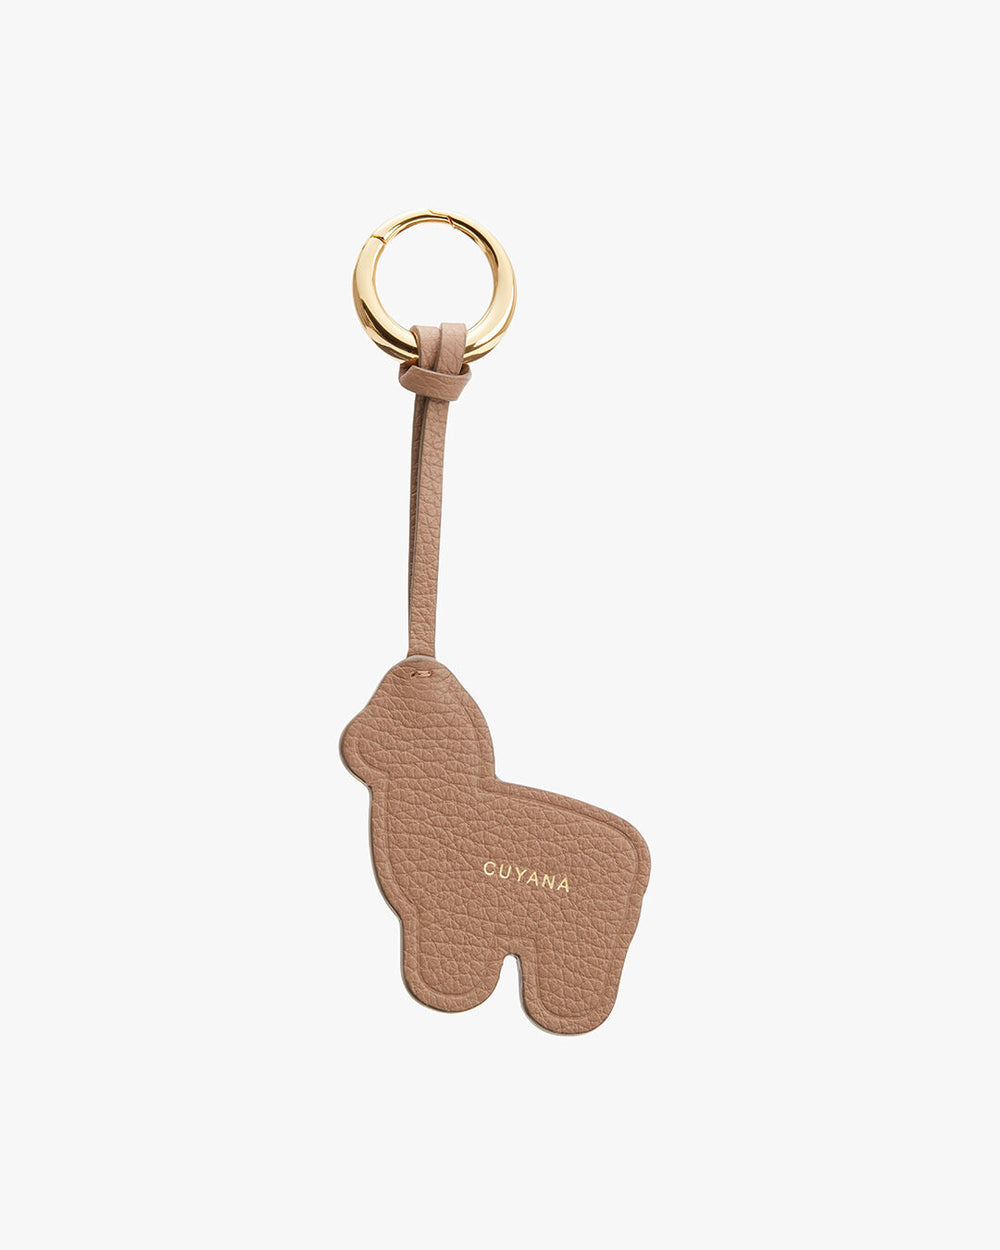 Keychain in the shape of an alpaca with a ring and brand name.